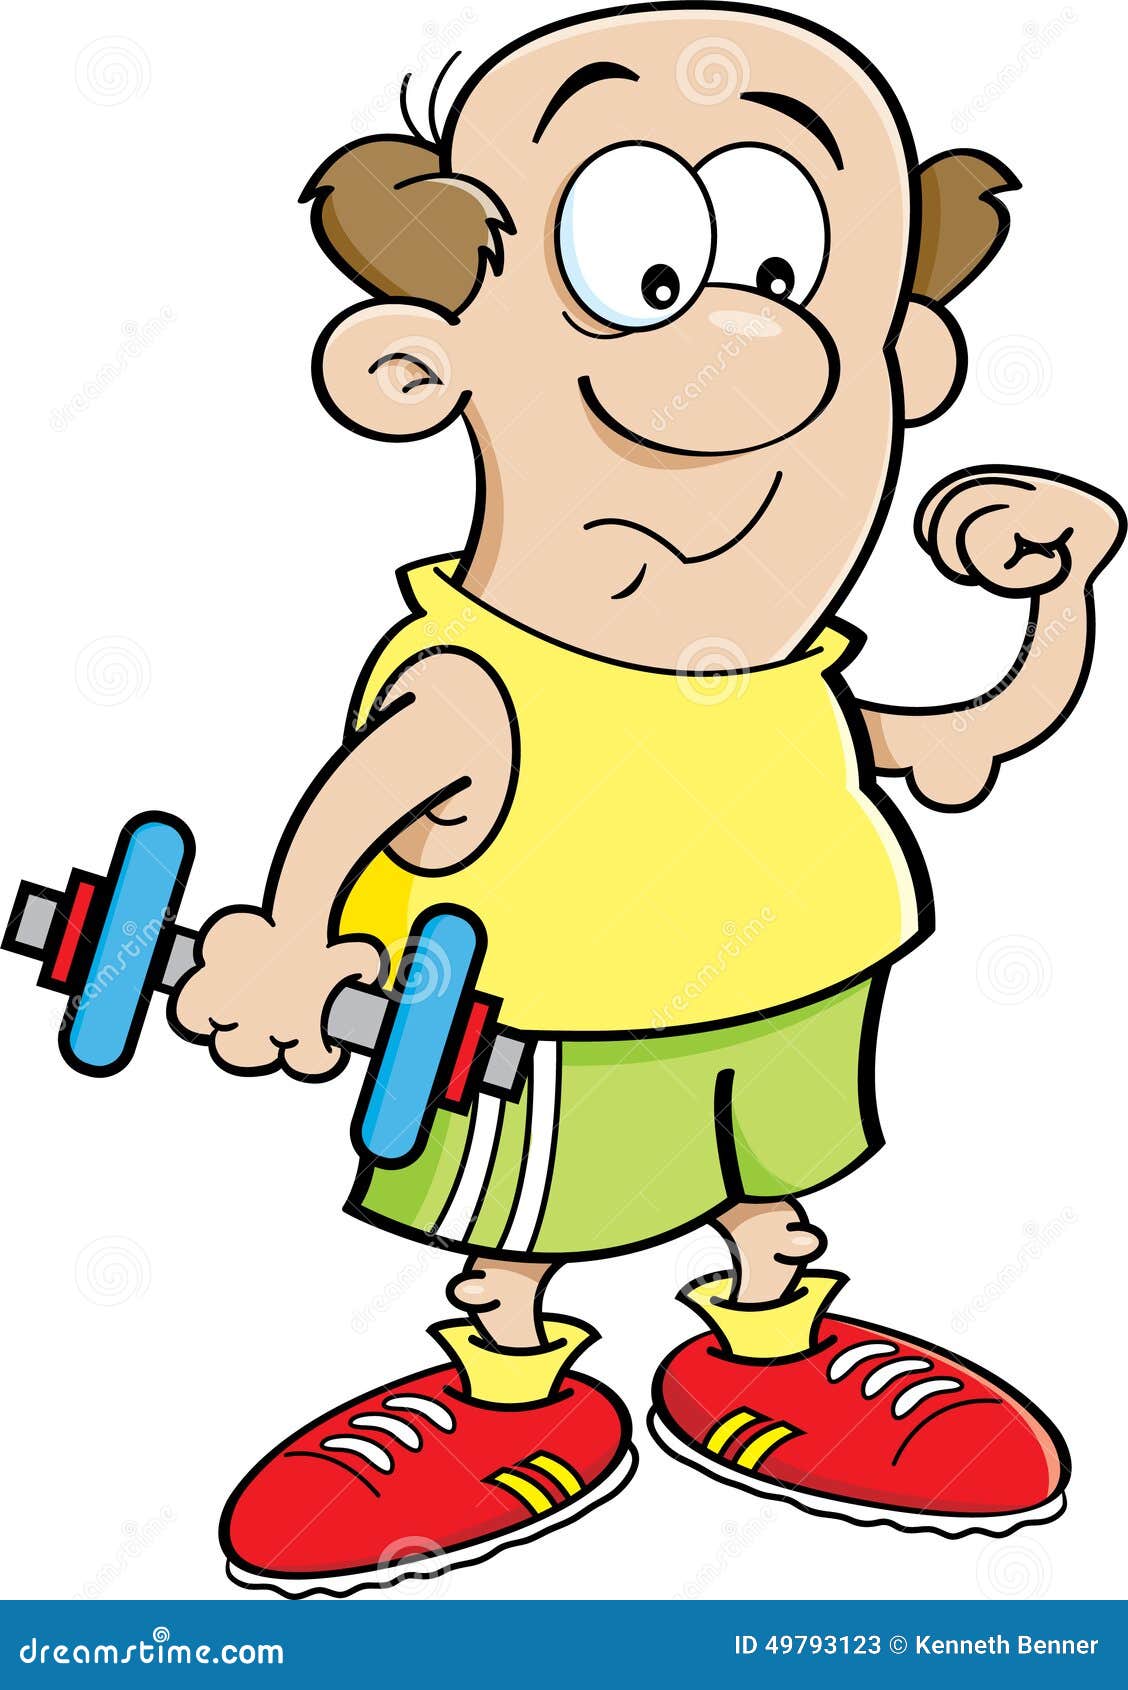 Weakling Cartoons, Illustrations & Vector Stock Images - 15 Pictures to